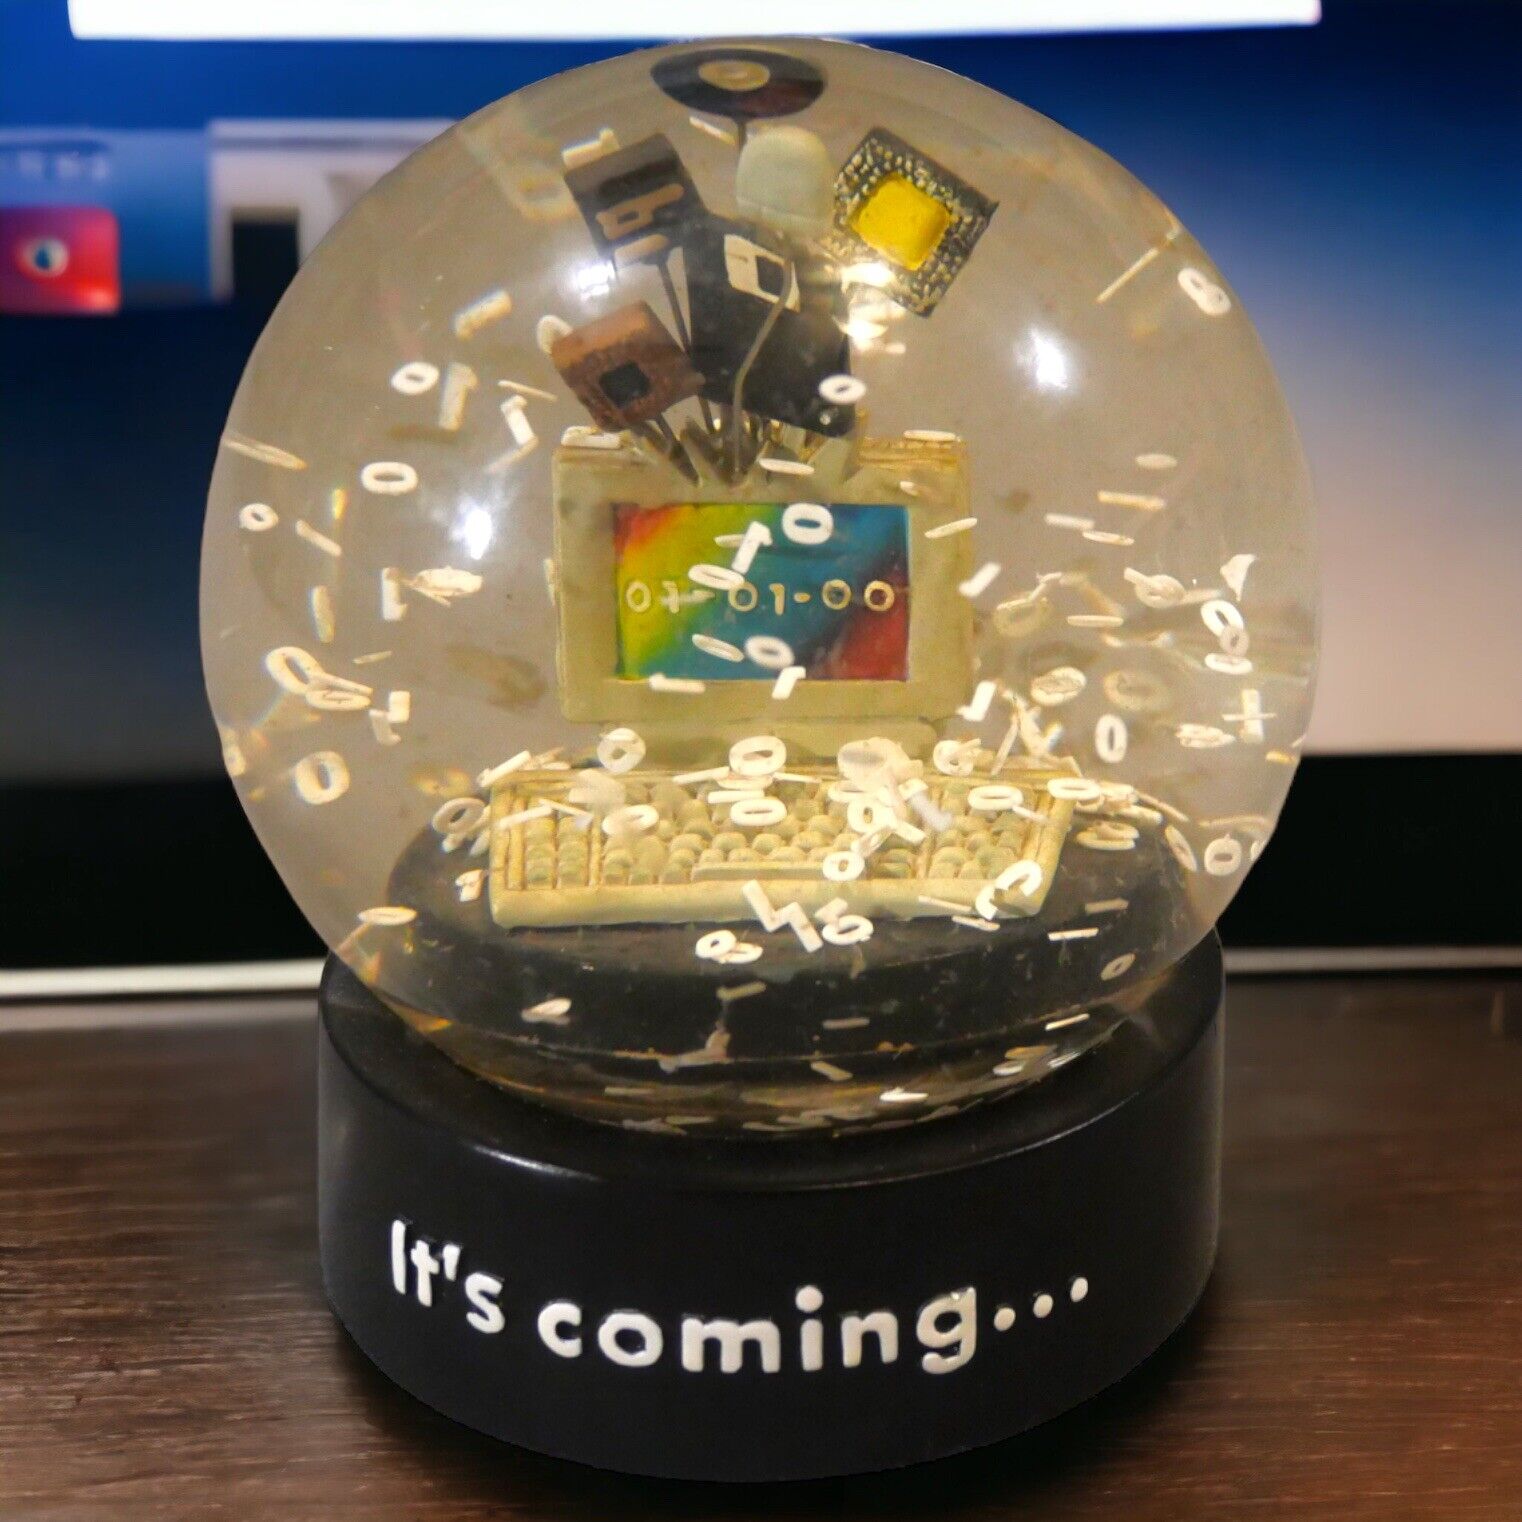 01-01-2000 It's coming... Y2K Computer Millennium New Year's Day Snowglobe